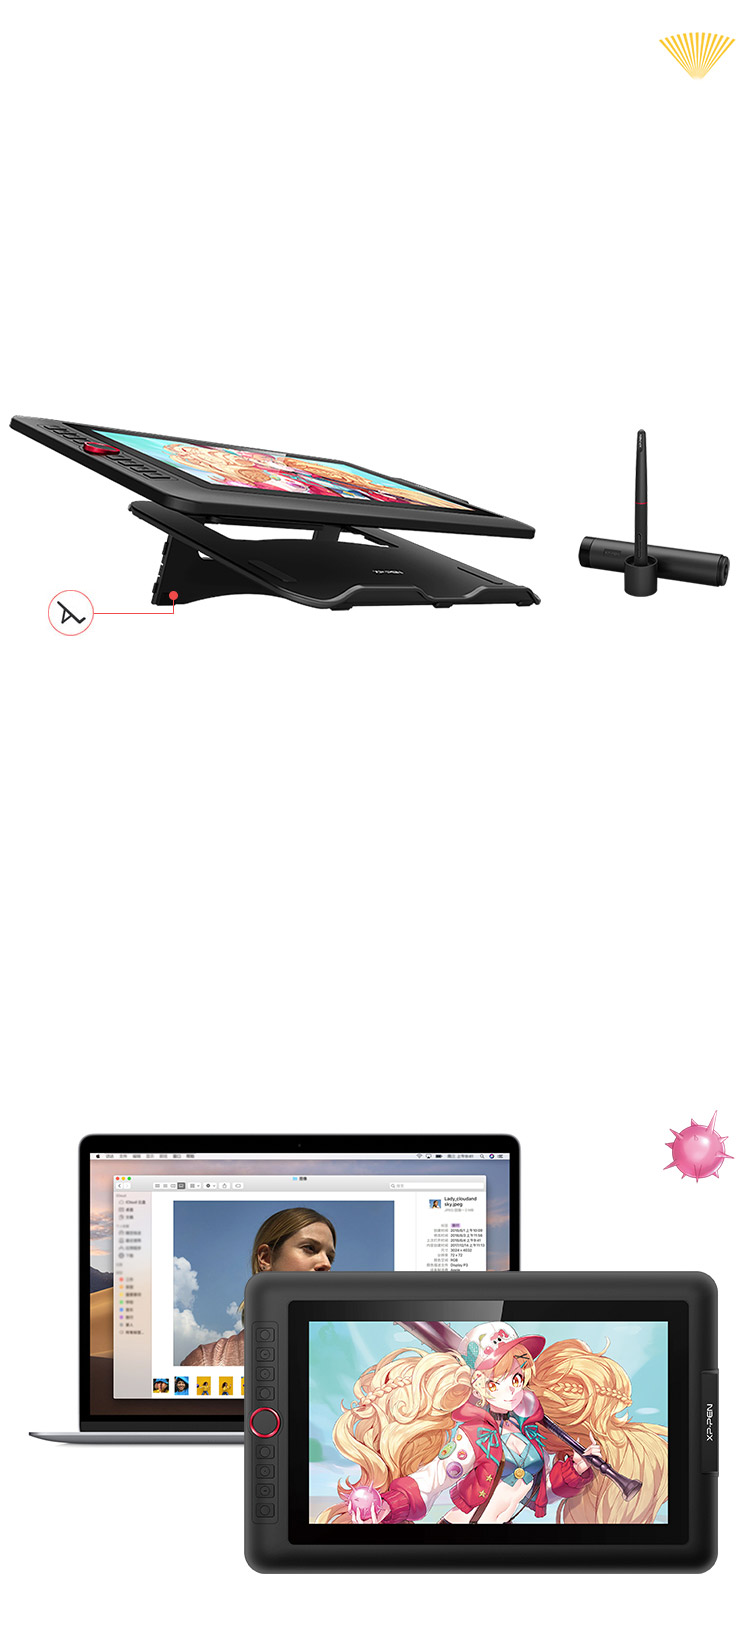 Duet - Remote Desktop, Second Display, Drawing Tablet, and More